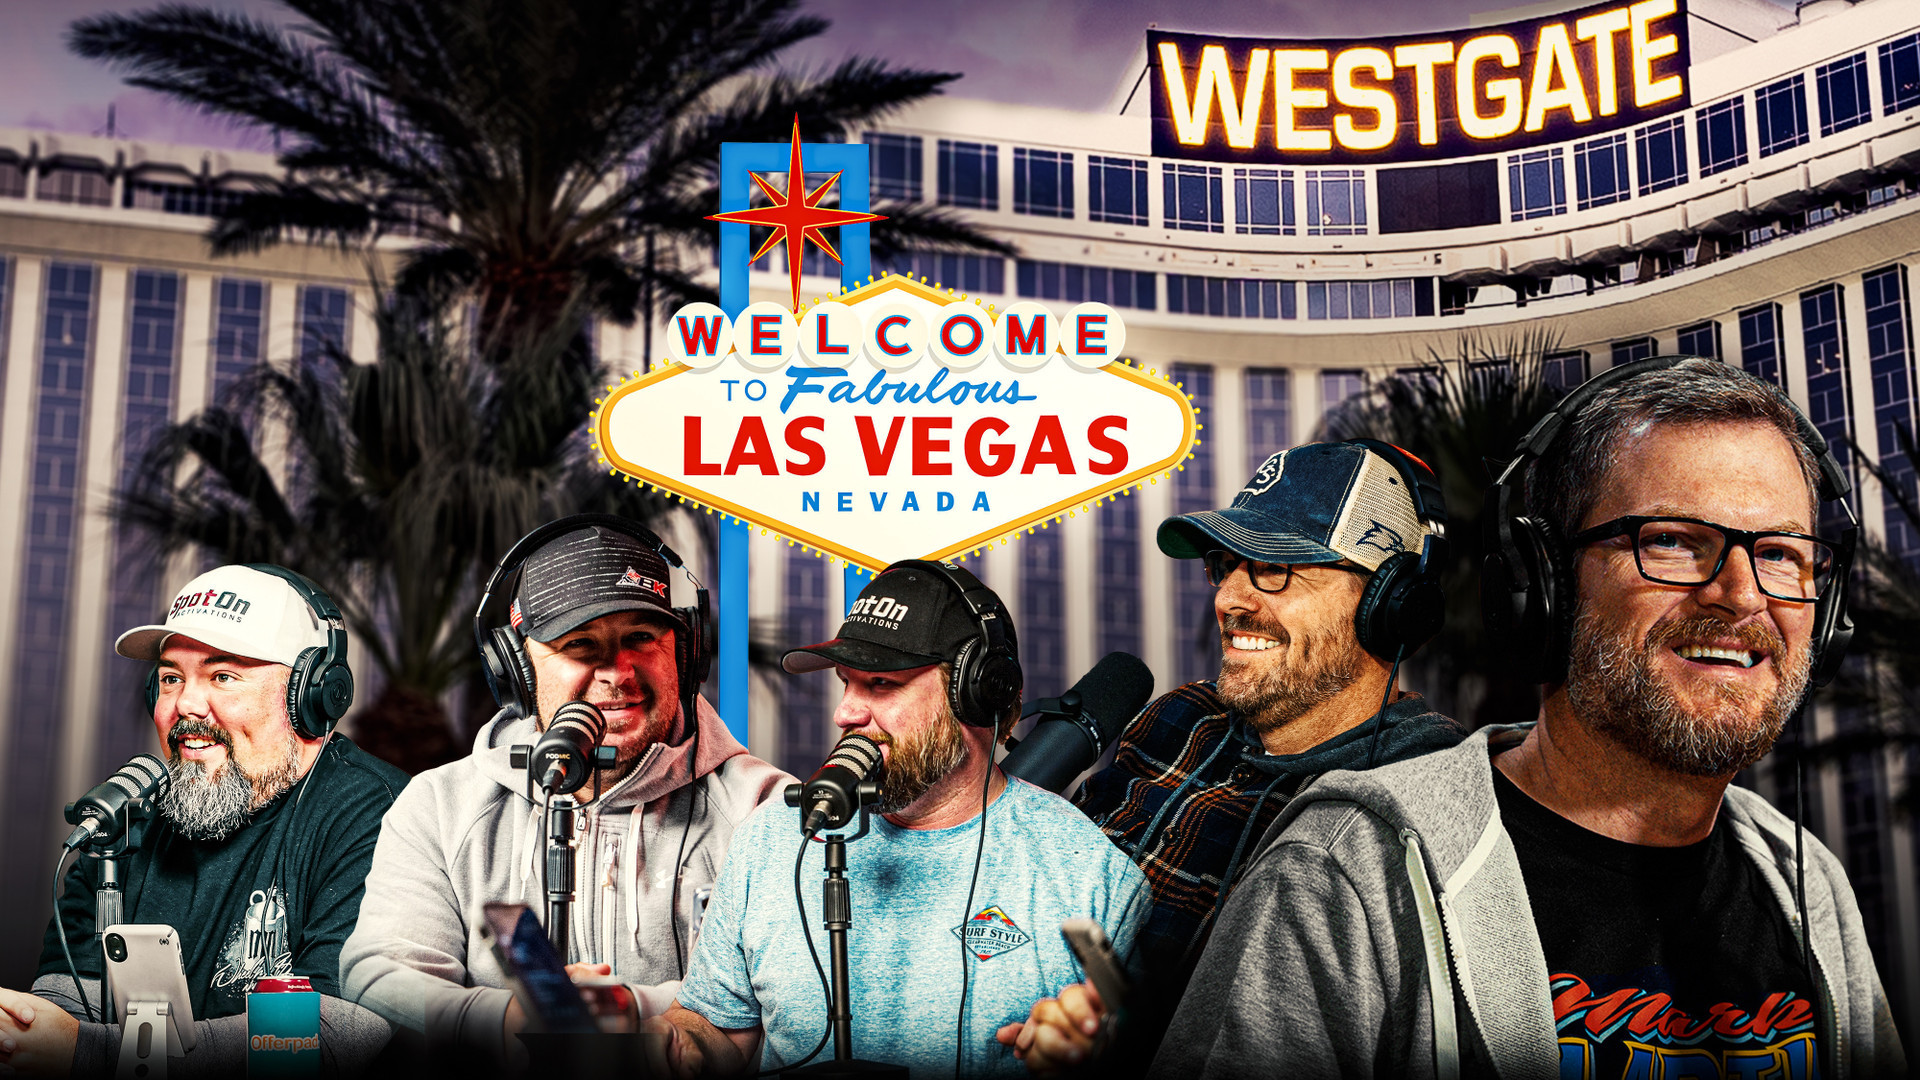 estgate Las Vegas Teams Up with Dirty Mo Media for Live Show with Dale Earnhardt Jr., Friends